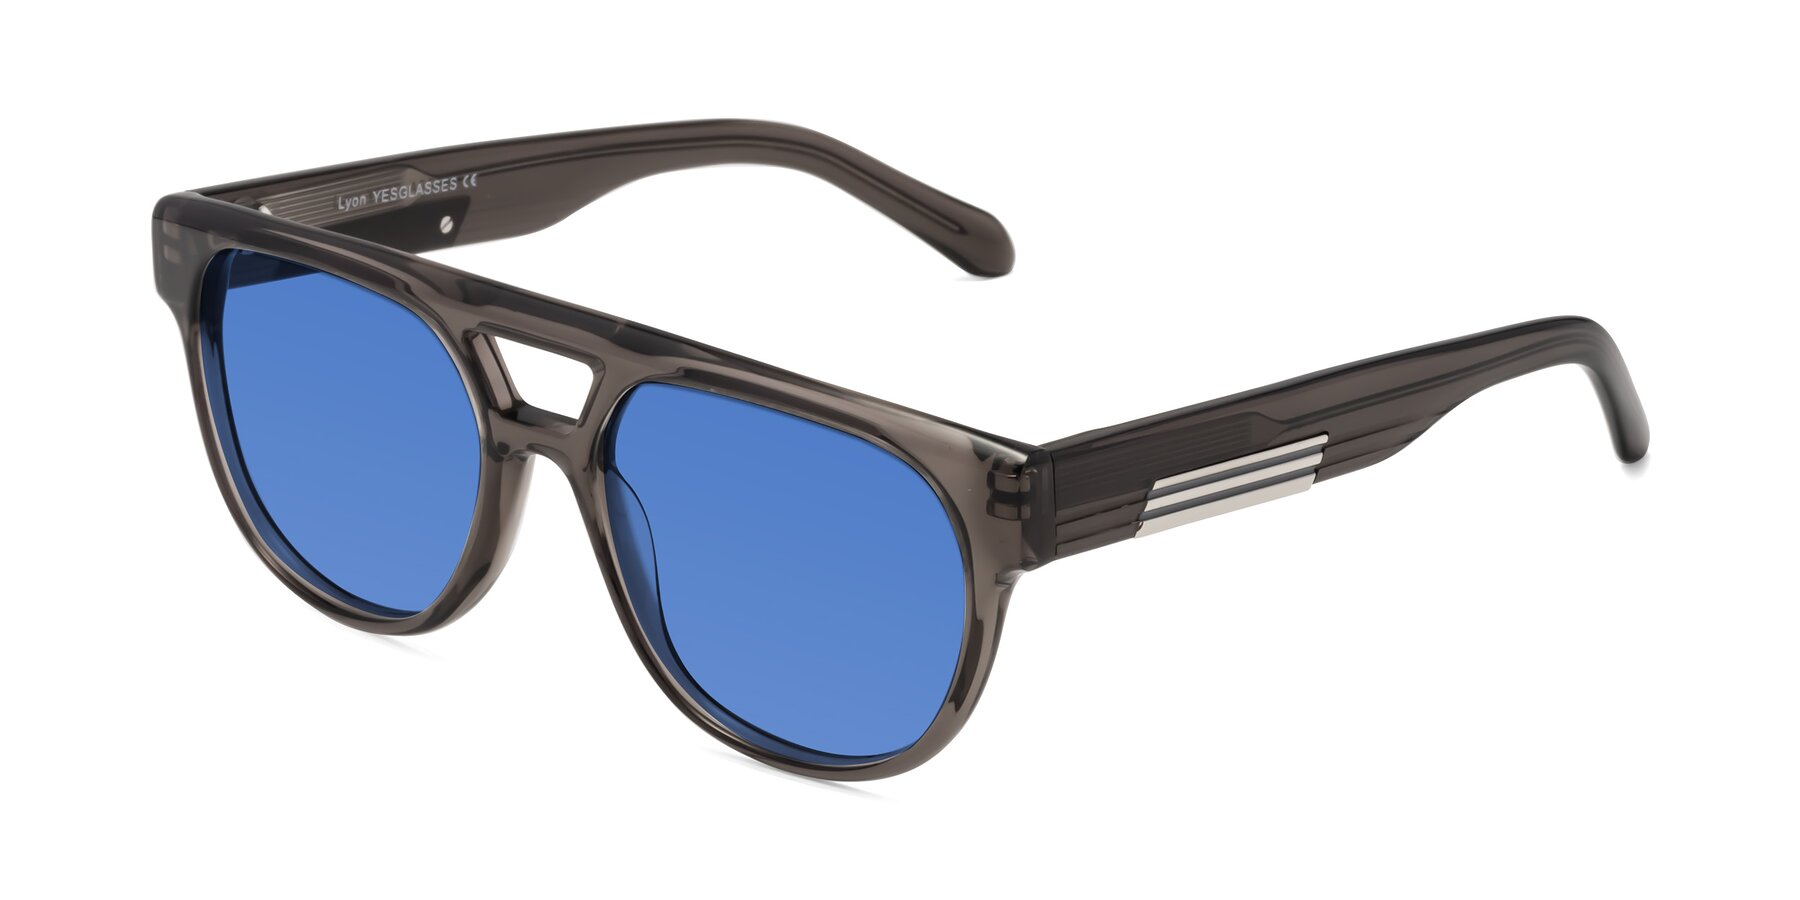 Angle of Lyon in Charcoal Gray with Blue Tinted Lenses